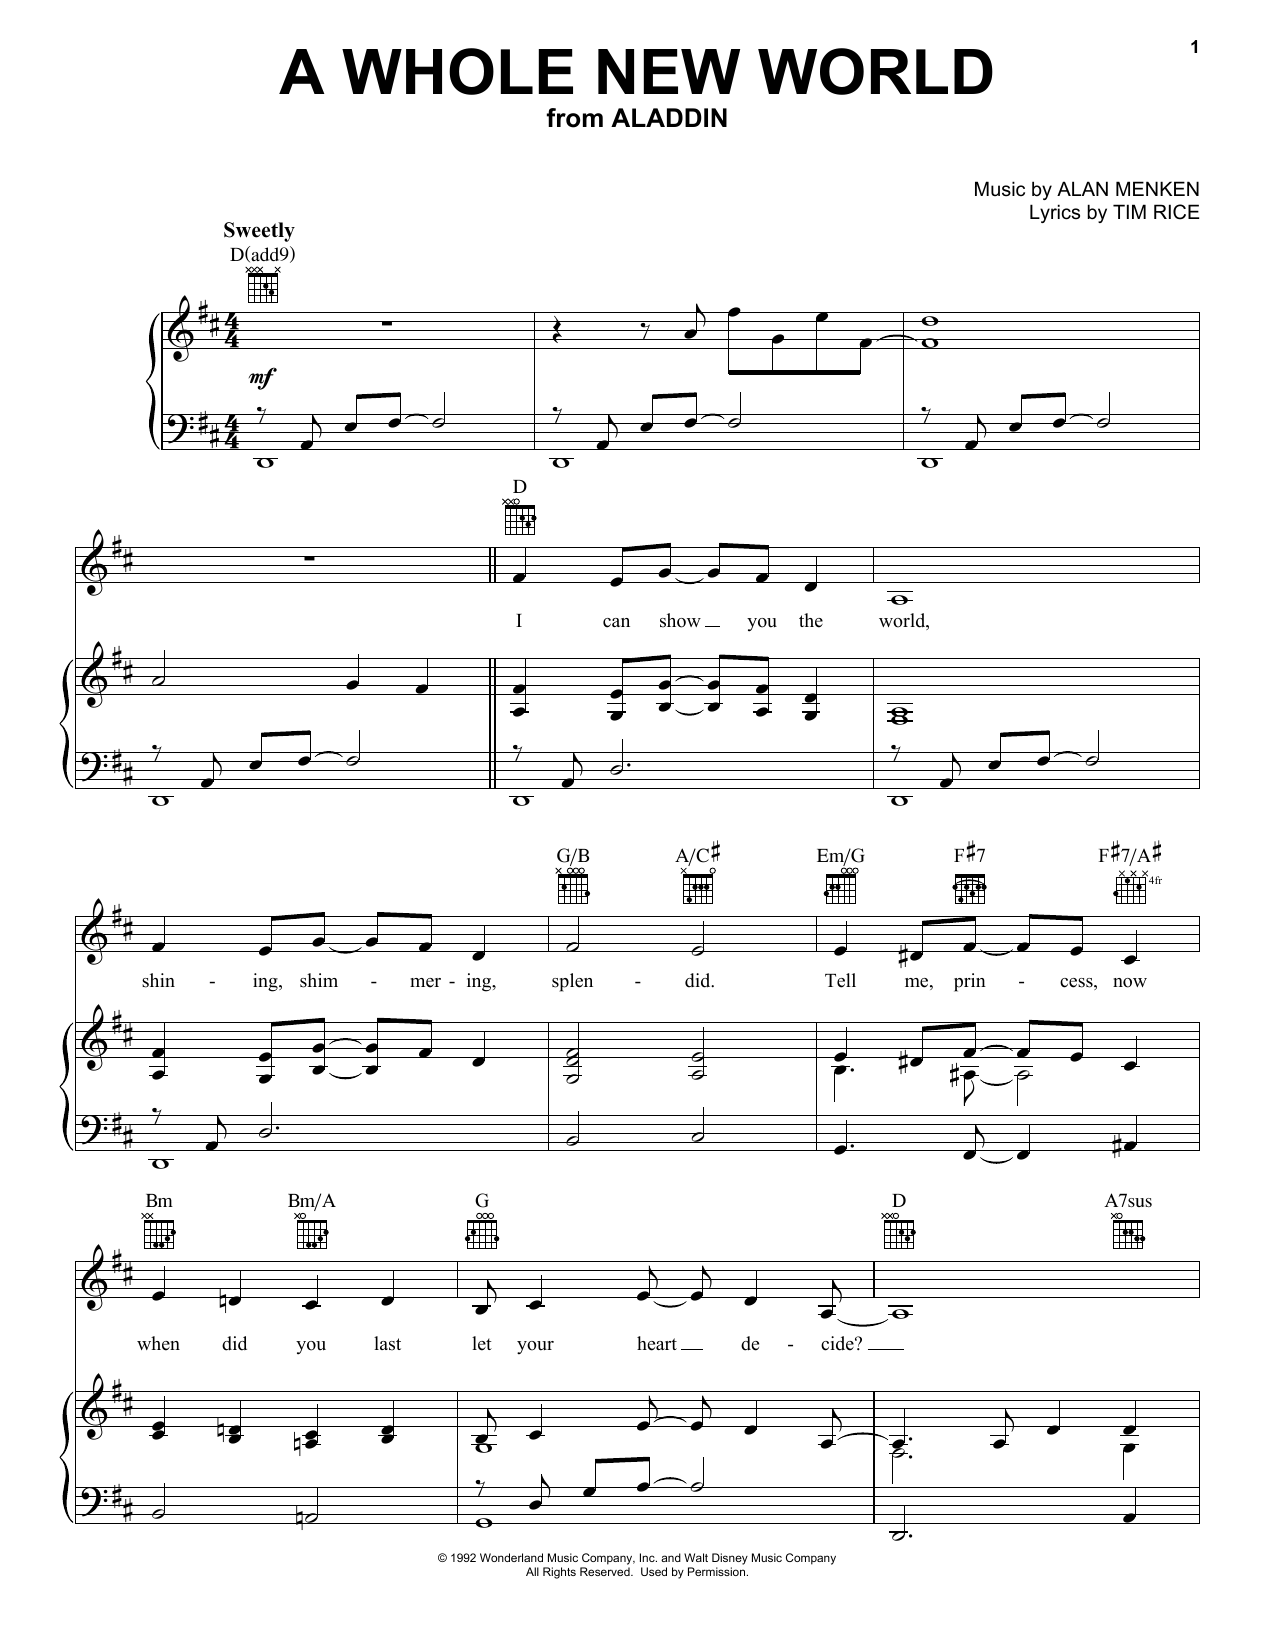 Alan Menken A Whole New World (from Aladdin) sheet music notes and chords. Download Printable PDF.